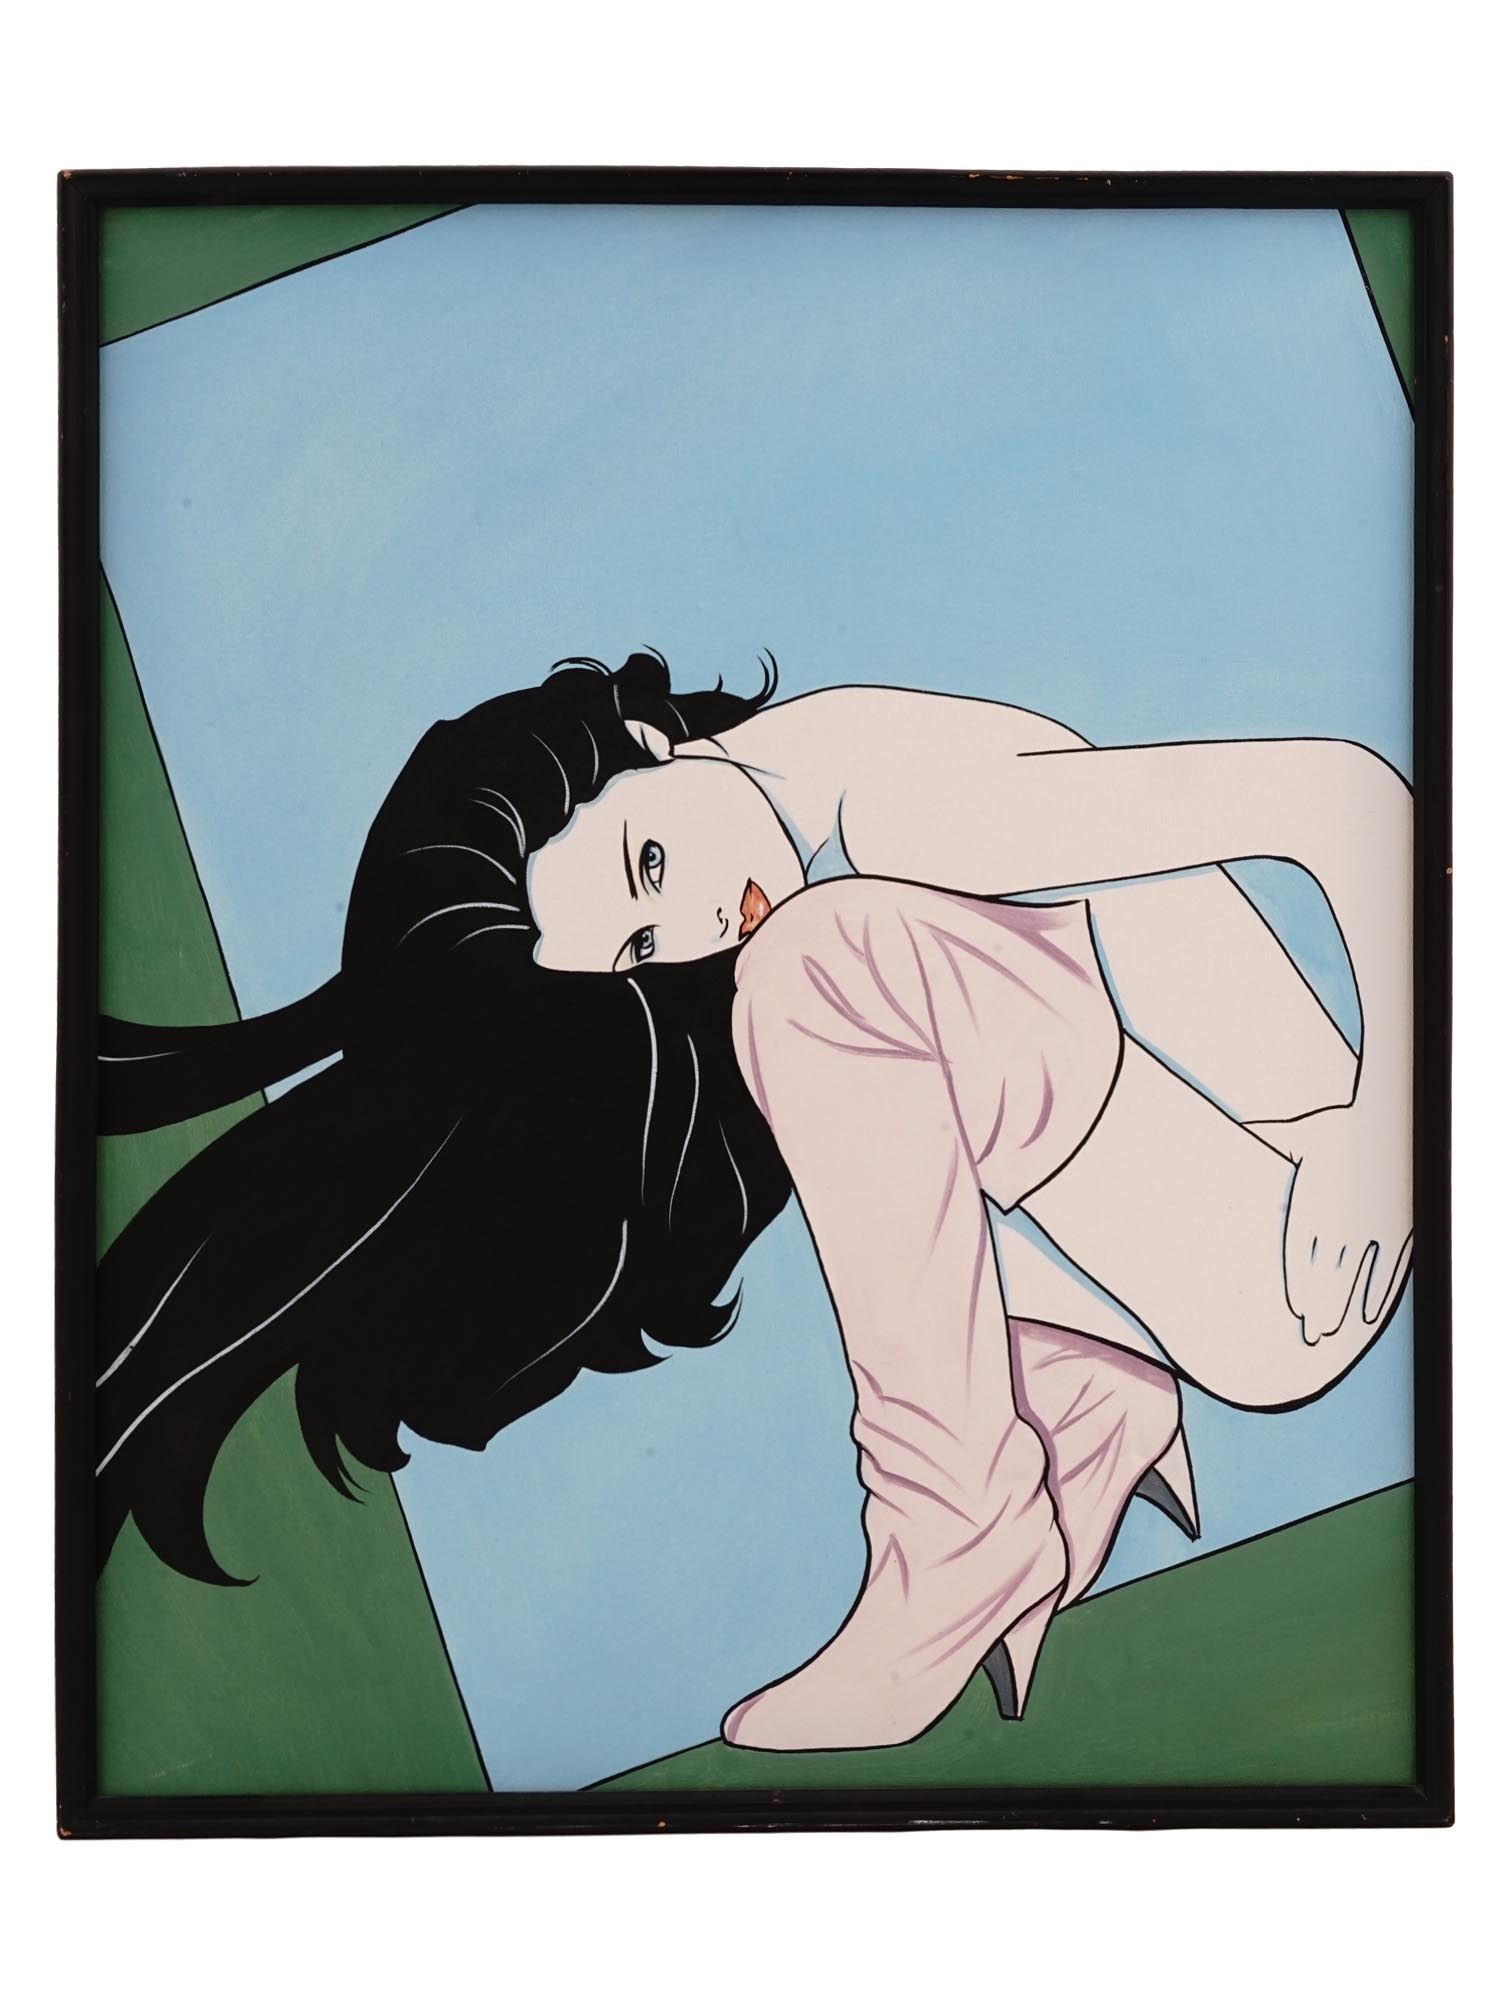 OIL ON CANVAS PAINTING SUSAN AFTER PATRICK NAGEL PIC-0